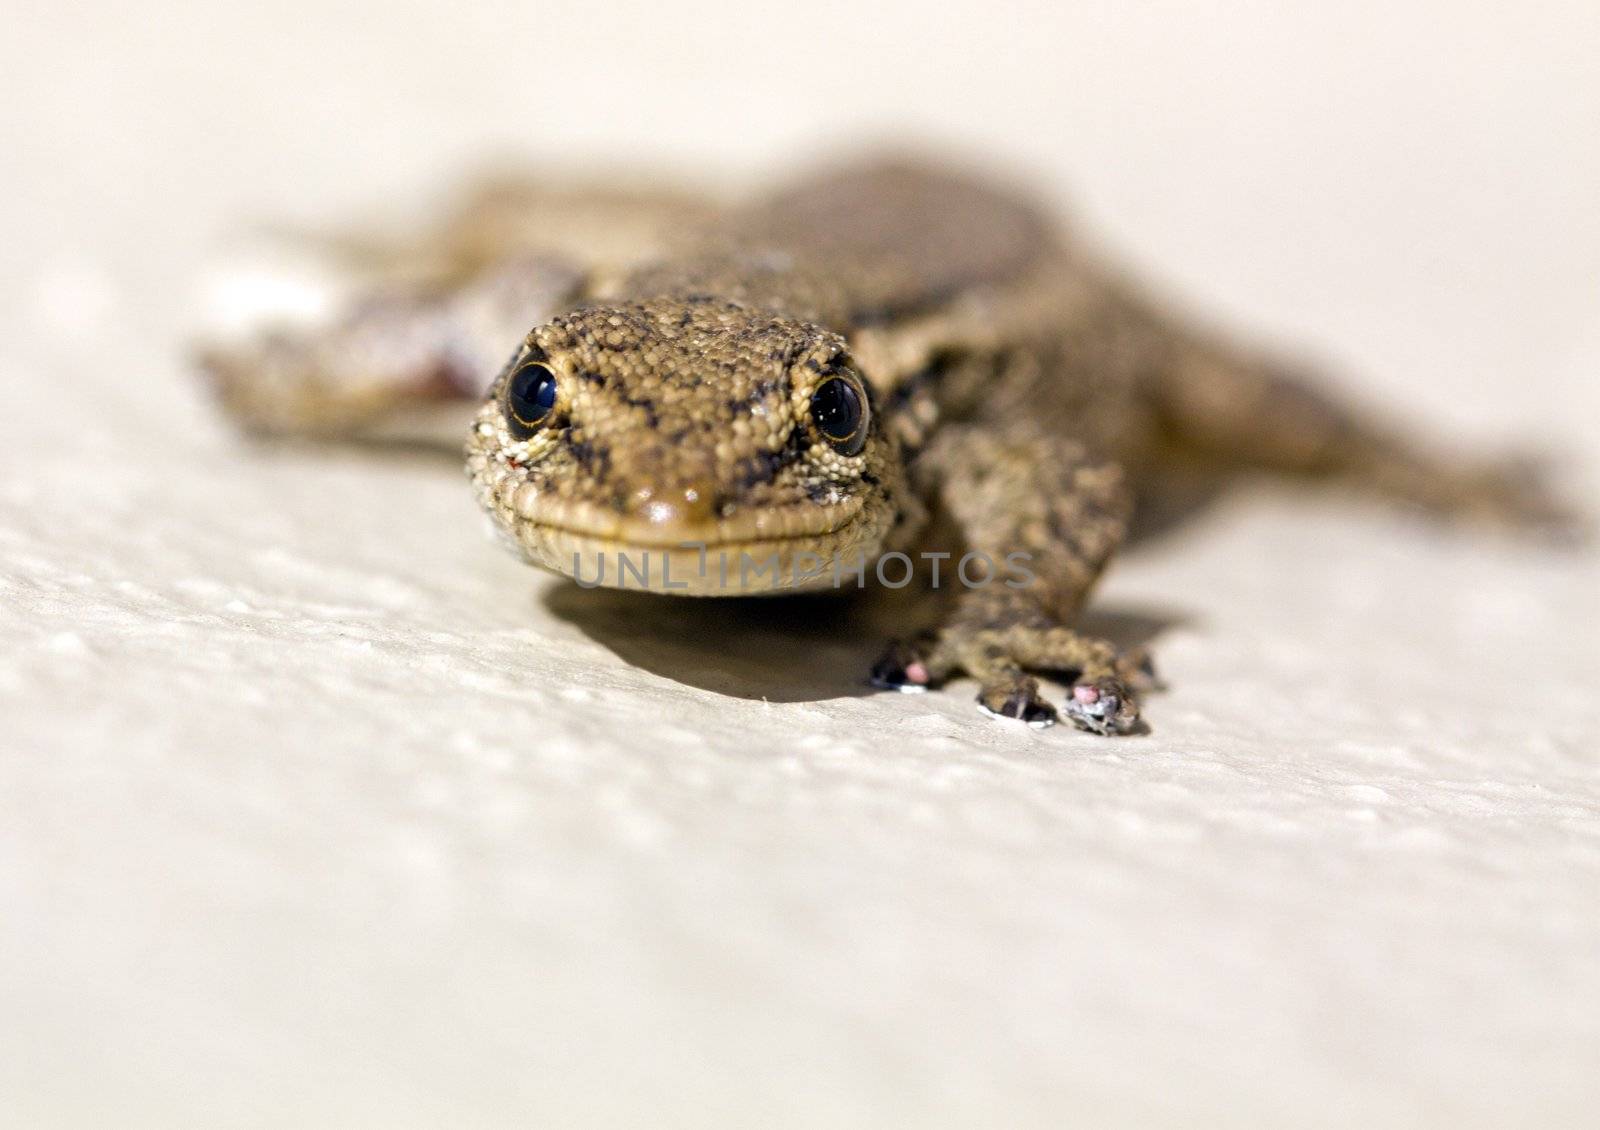 Common Lizard (Juvenile) by ChrisAlleaume